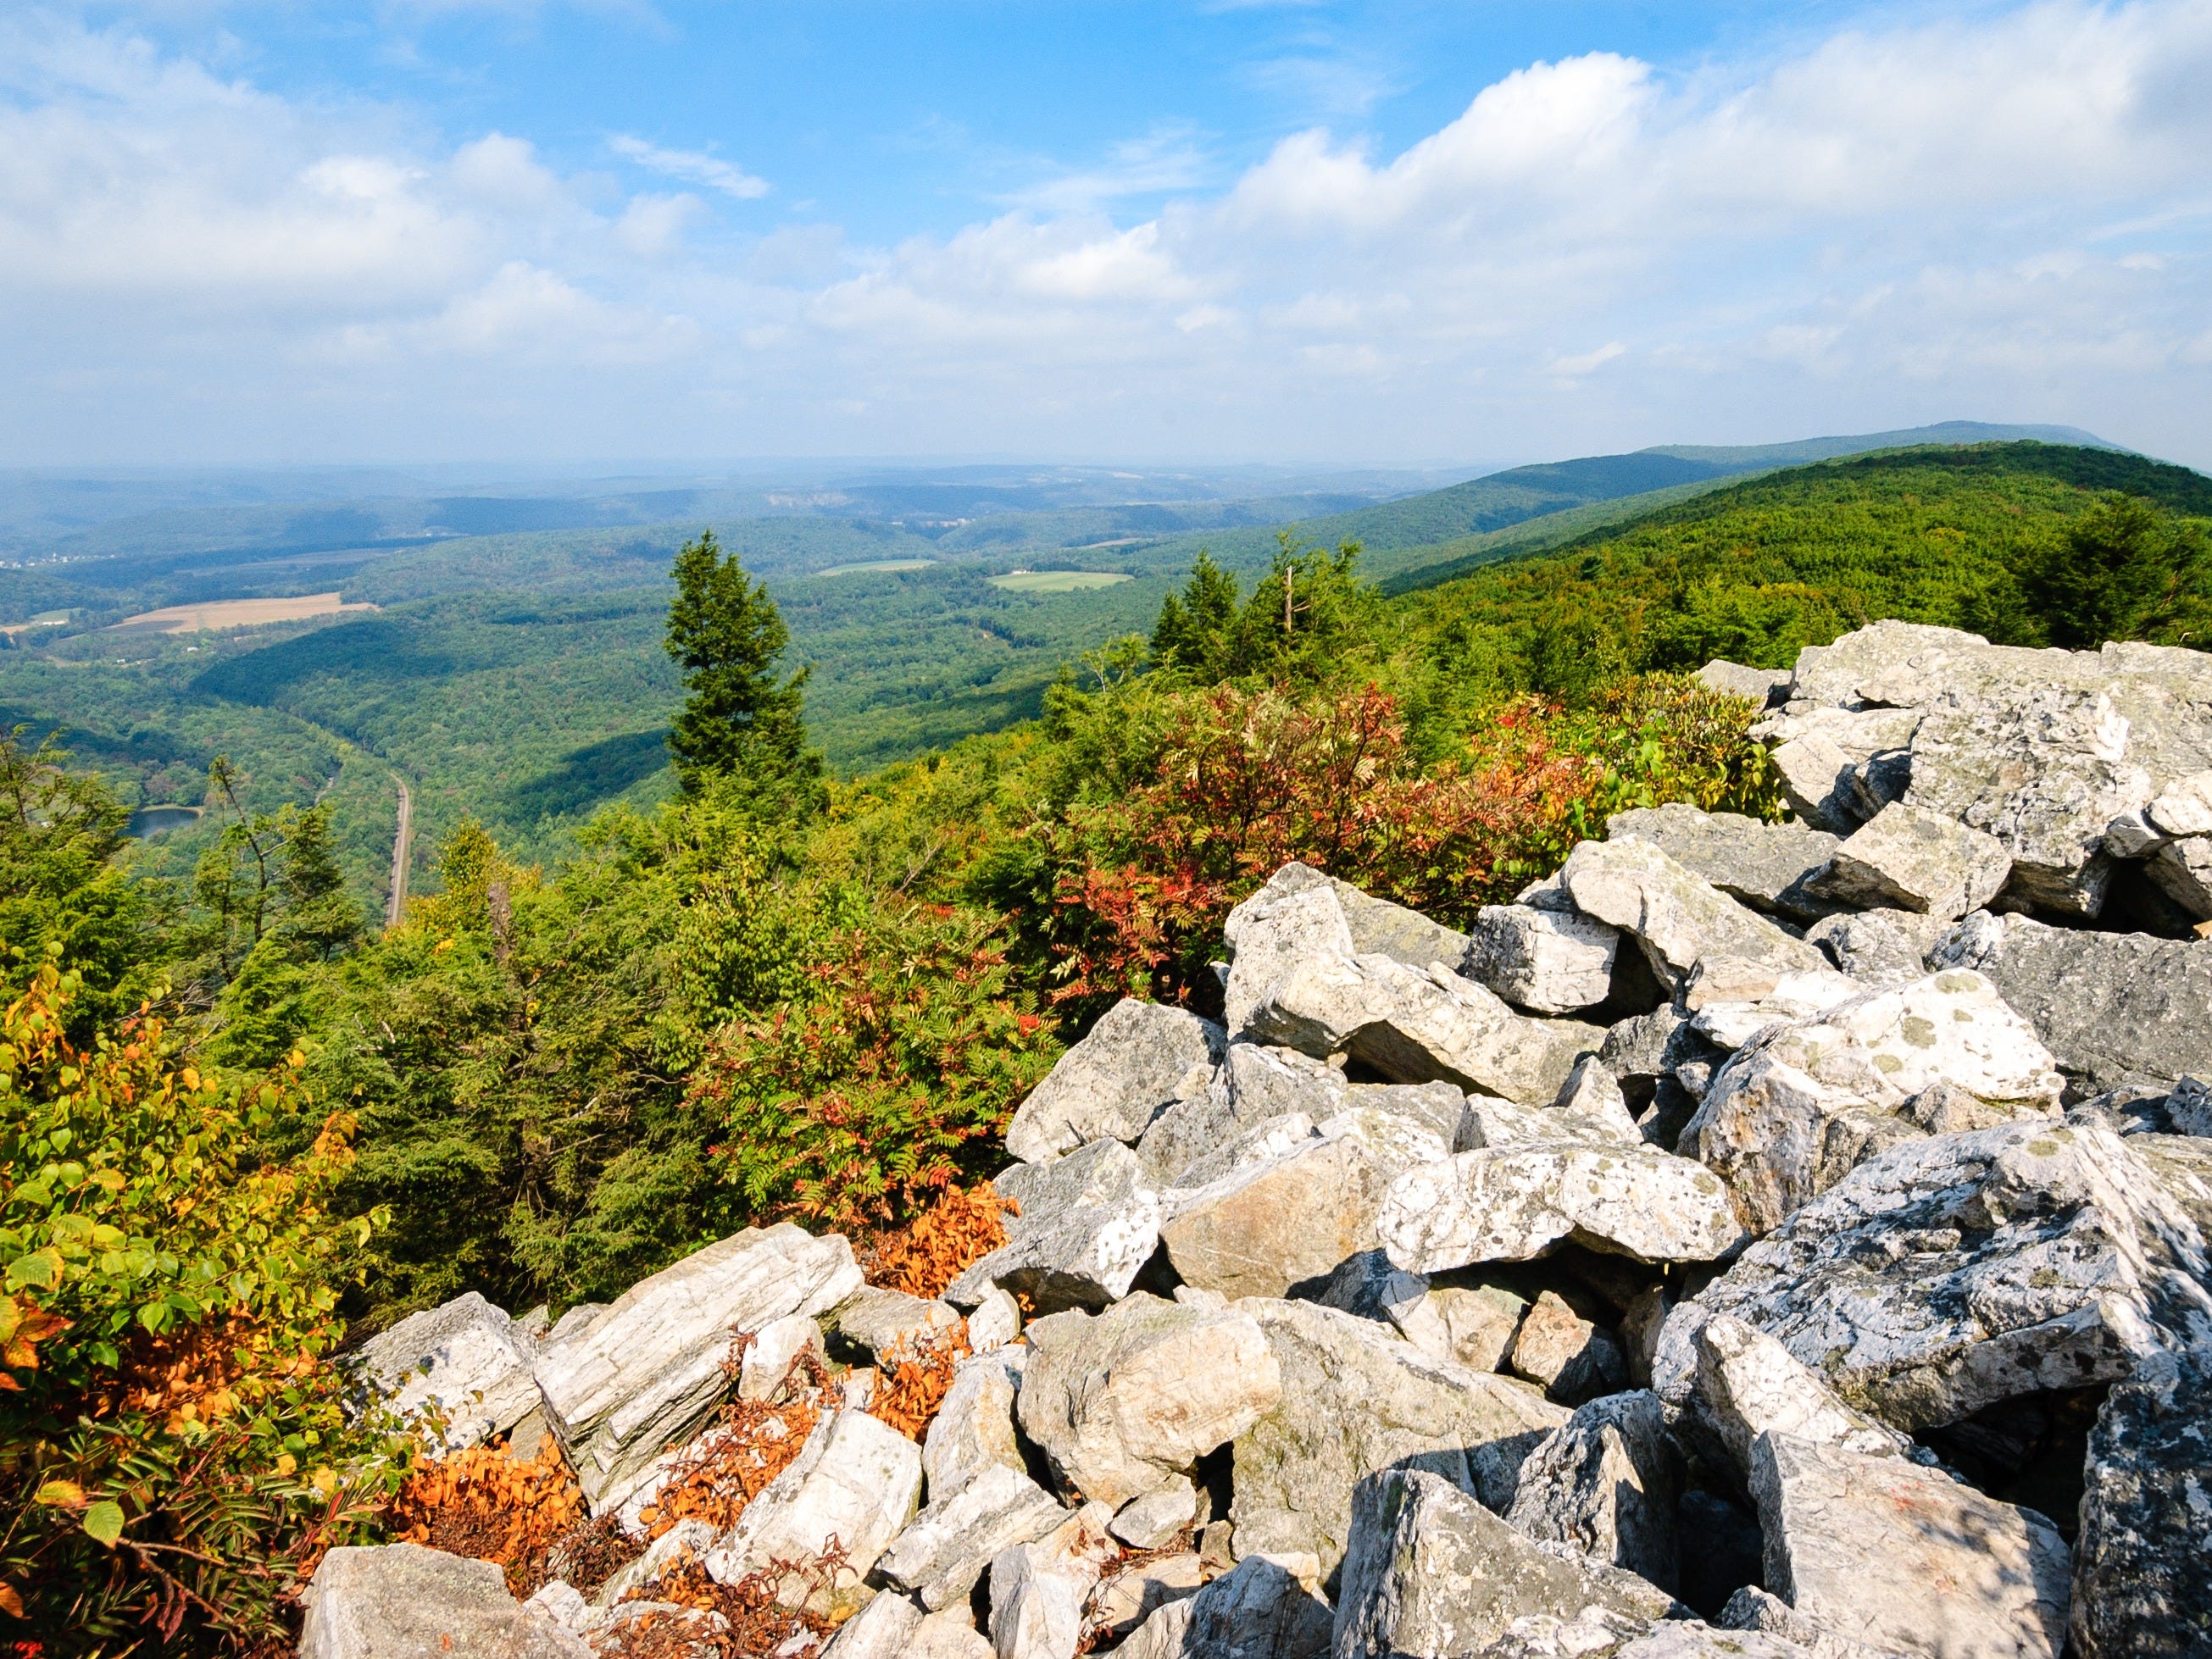 <p>Lehigh Valley, Pennsylvania, is tucked into the rolling mountains of the countryside, and it's a great way to get away from the hustle and bustle of city life.</p><p>The <a href="https://www.hawkmountain.org/">Hawk Mountain Sanctuary</a> offers 8 miles of easy-to-moderate trails. Throughout the hikes, visitors can enjoy views of vistas and soaring raptors (birds of prey). </p>